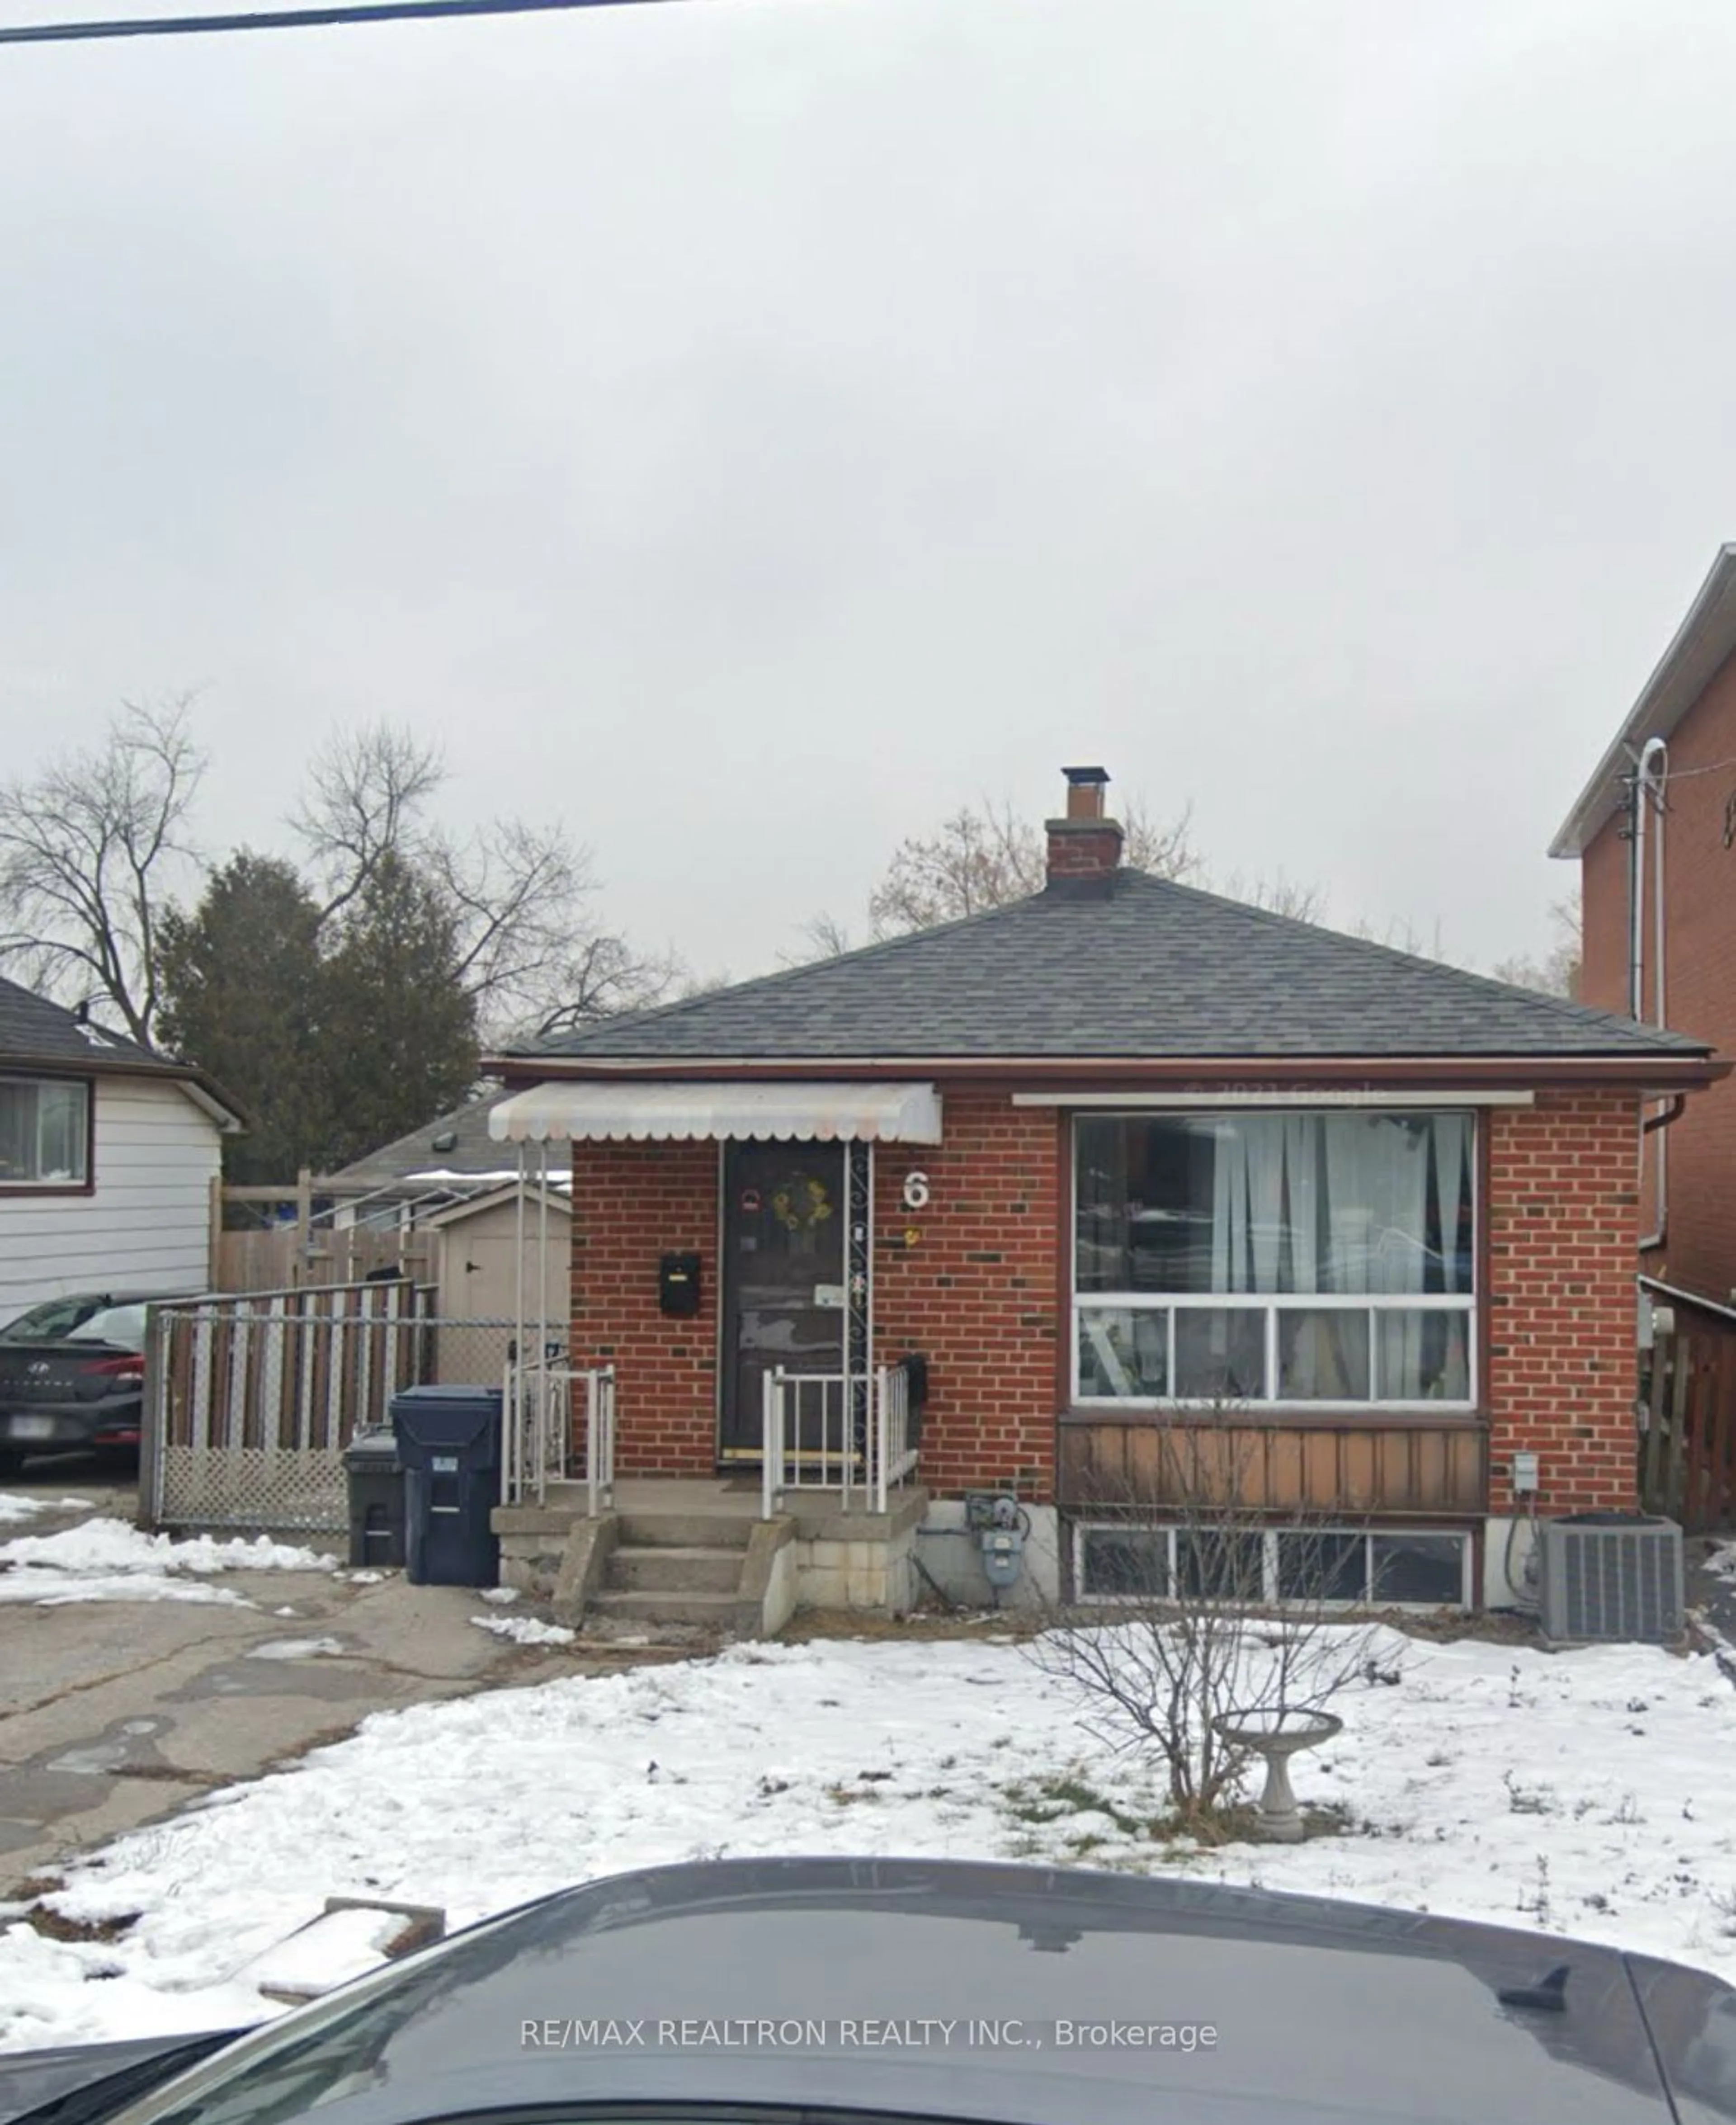 Frontside or backside of a home for 6 N Edgely Ave, Toronto Ontario M1K 1T6